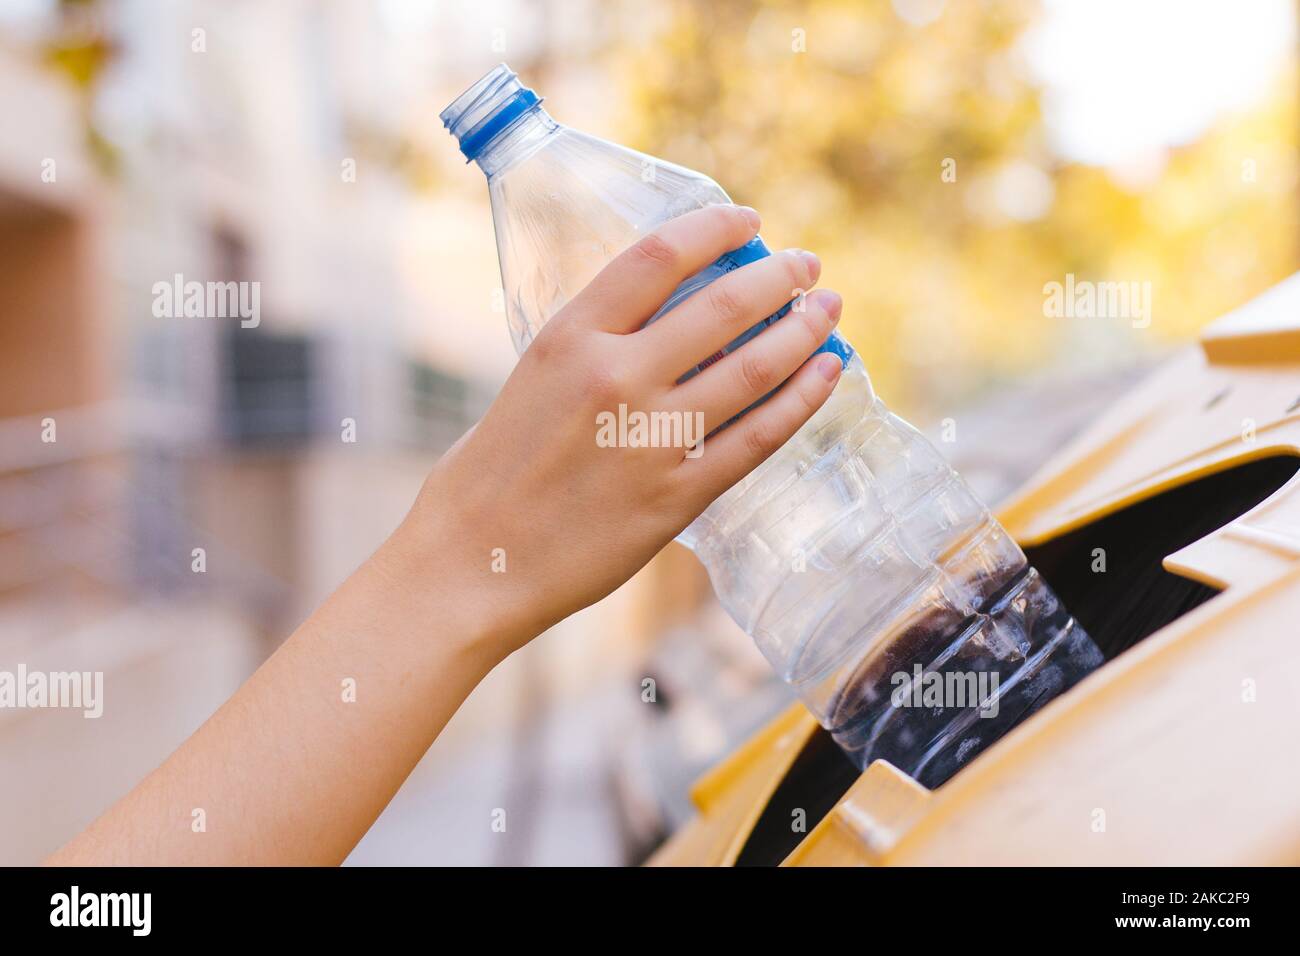 Stock photo of a woman's hand recycling a plastic bottle in a yellow container to save the environment Stock Photo